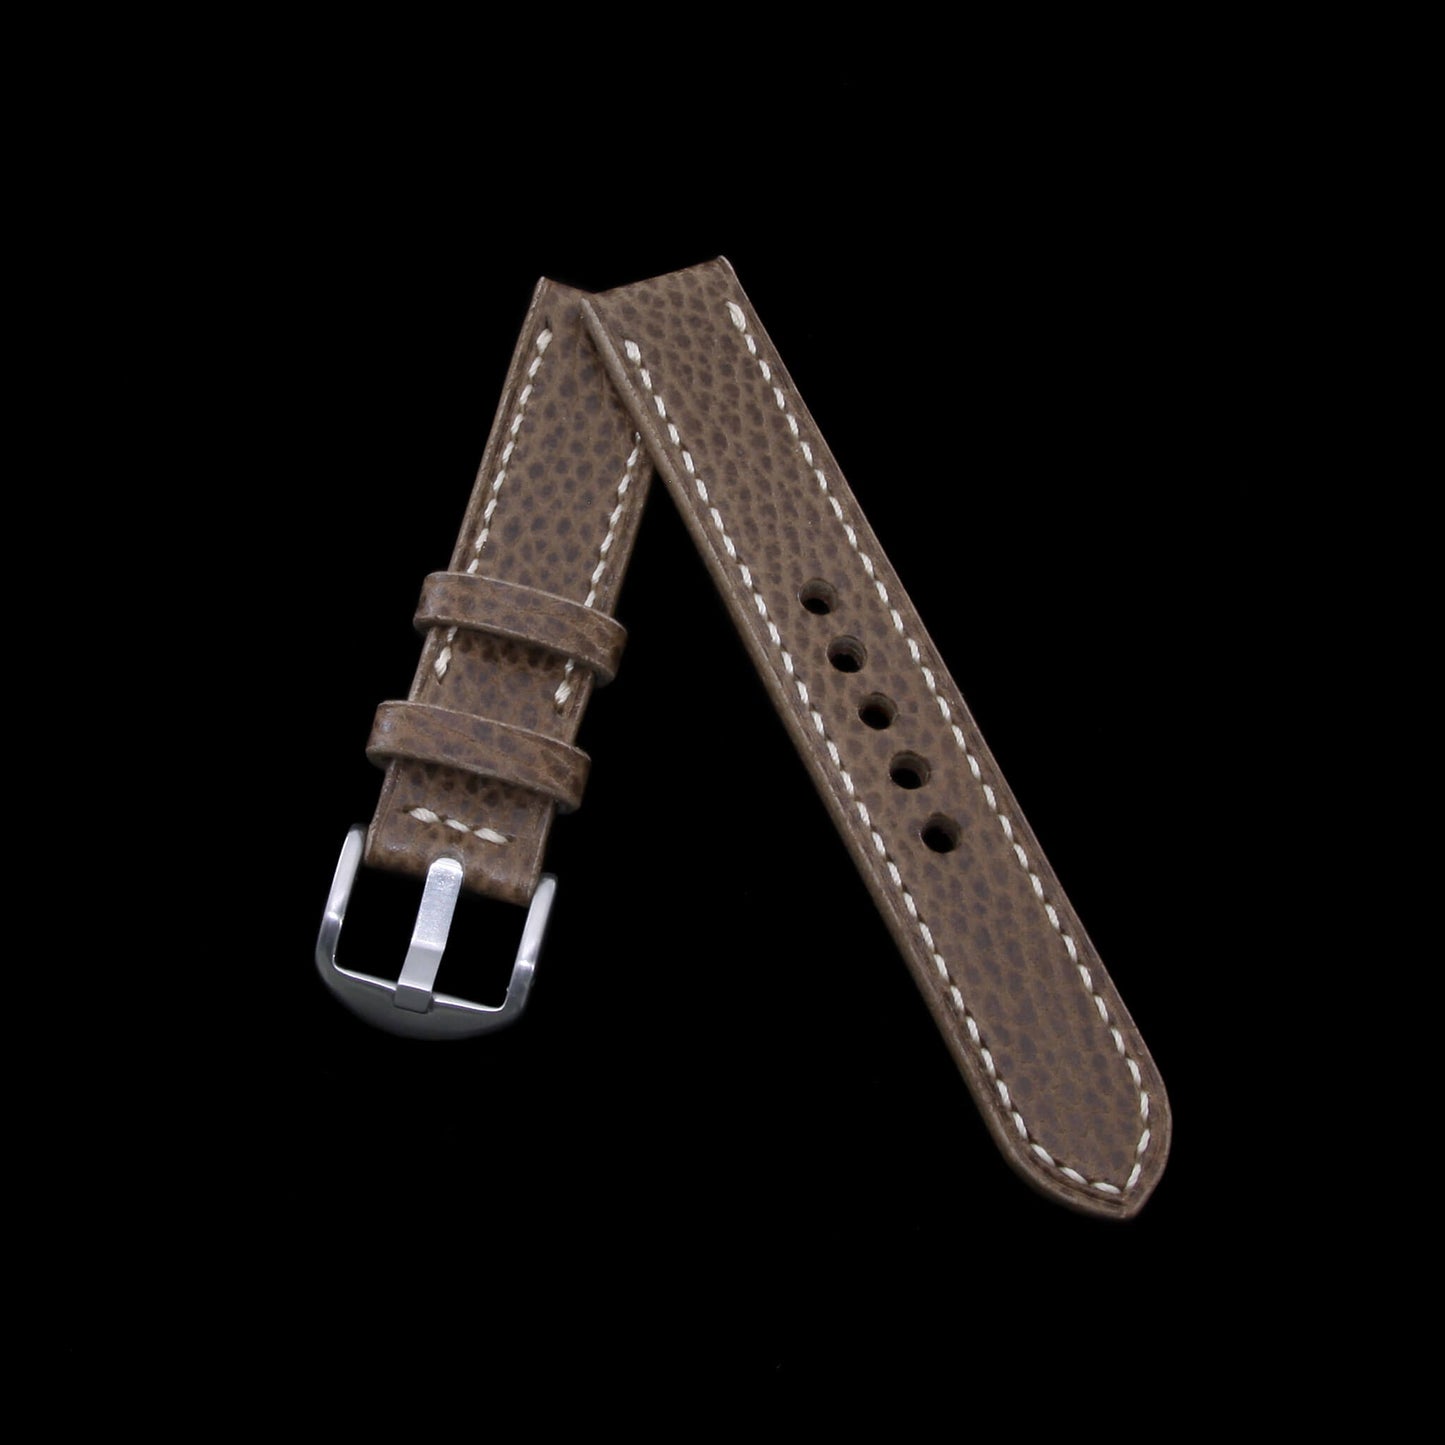 2-Piece Full Stitch Leather Watch Strap, made with Buttero Taupe full grain Italian veg-tanned leather by Cozy Handmade